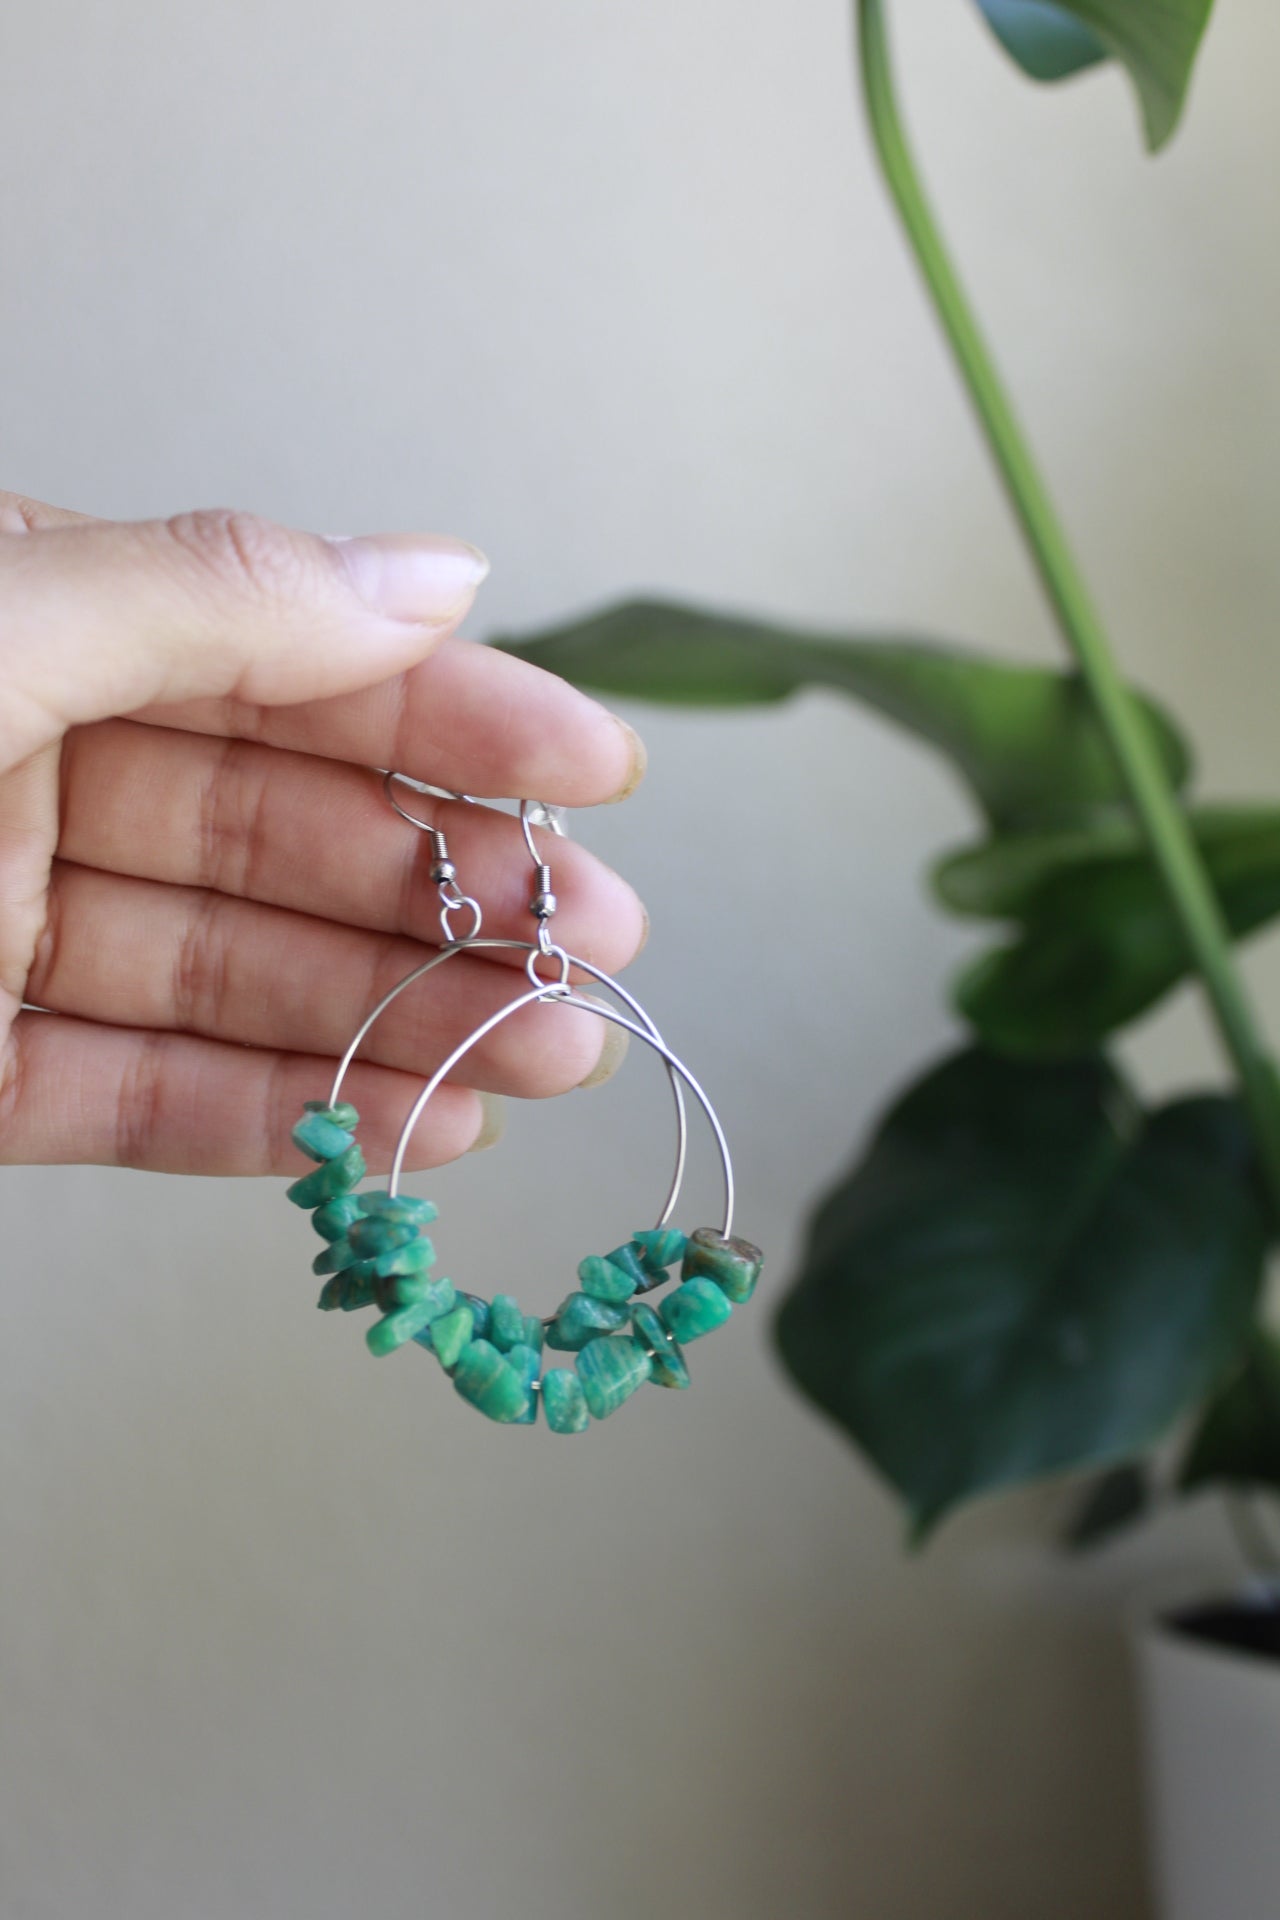 tuquoise hoop earrings - with the trees